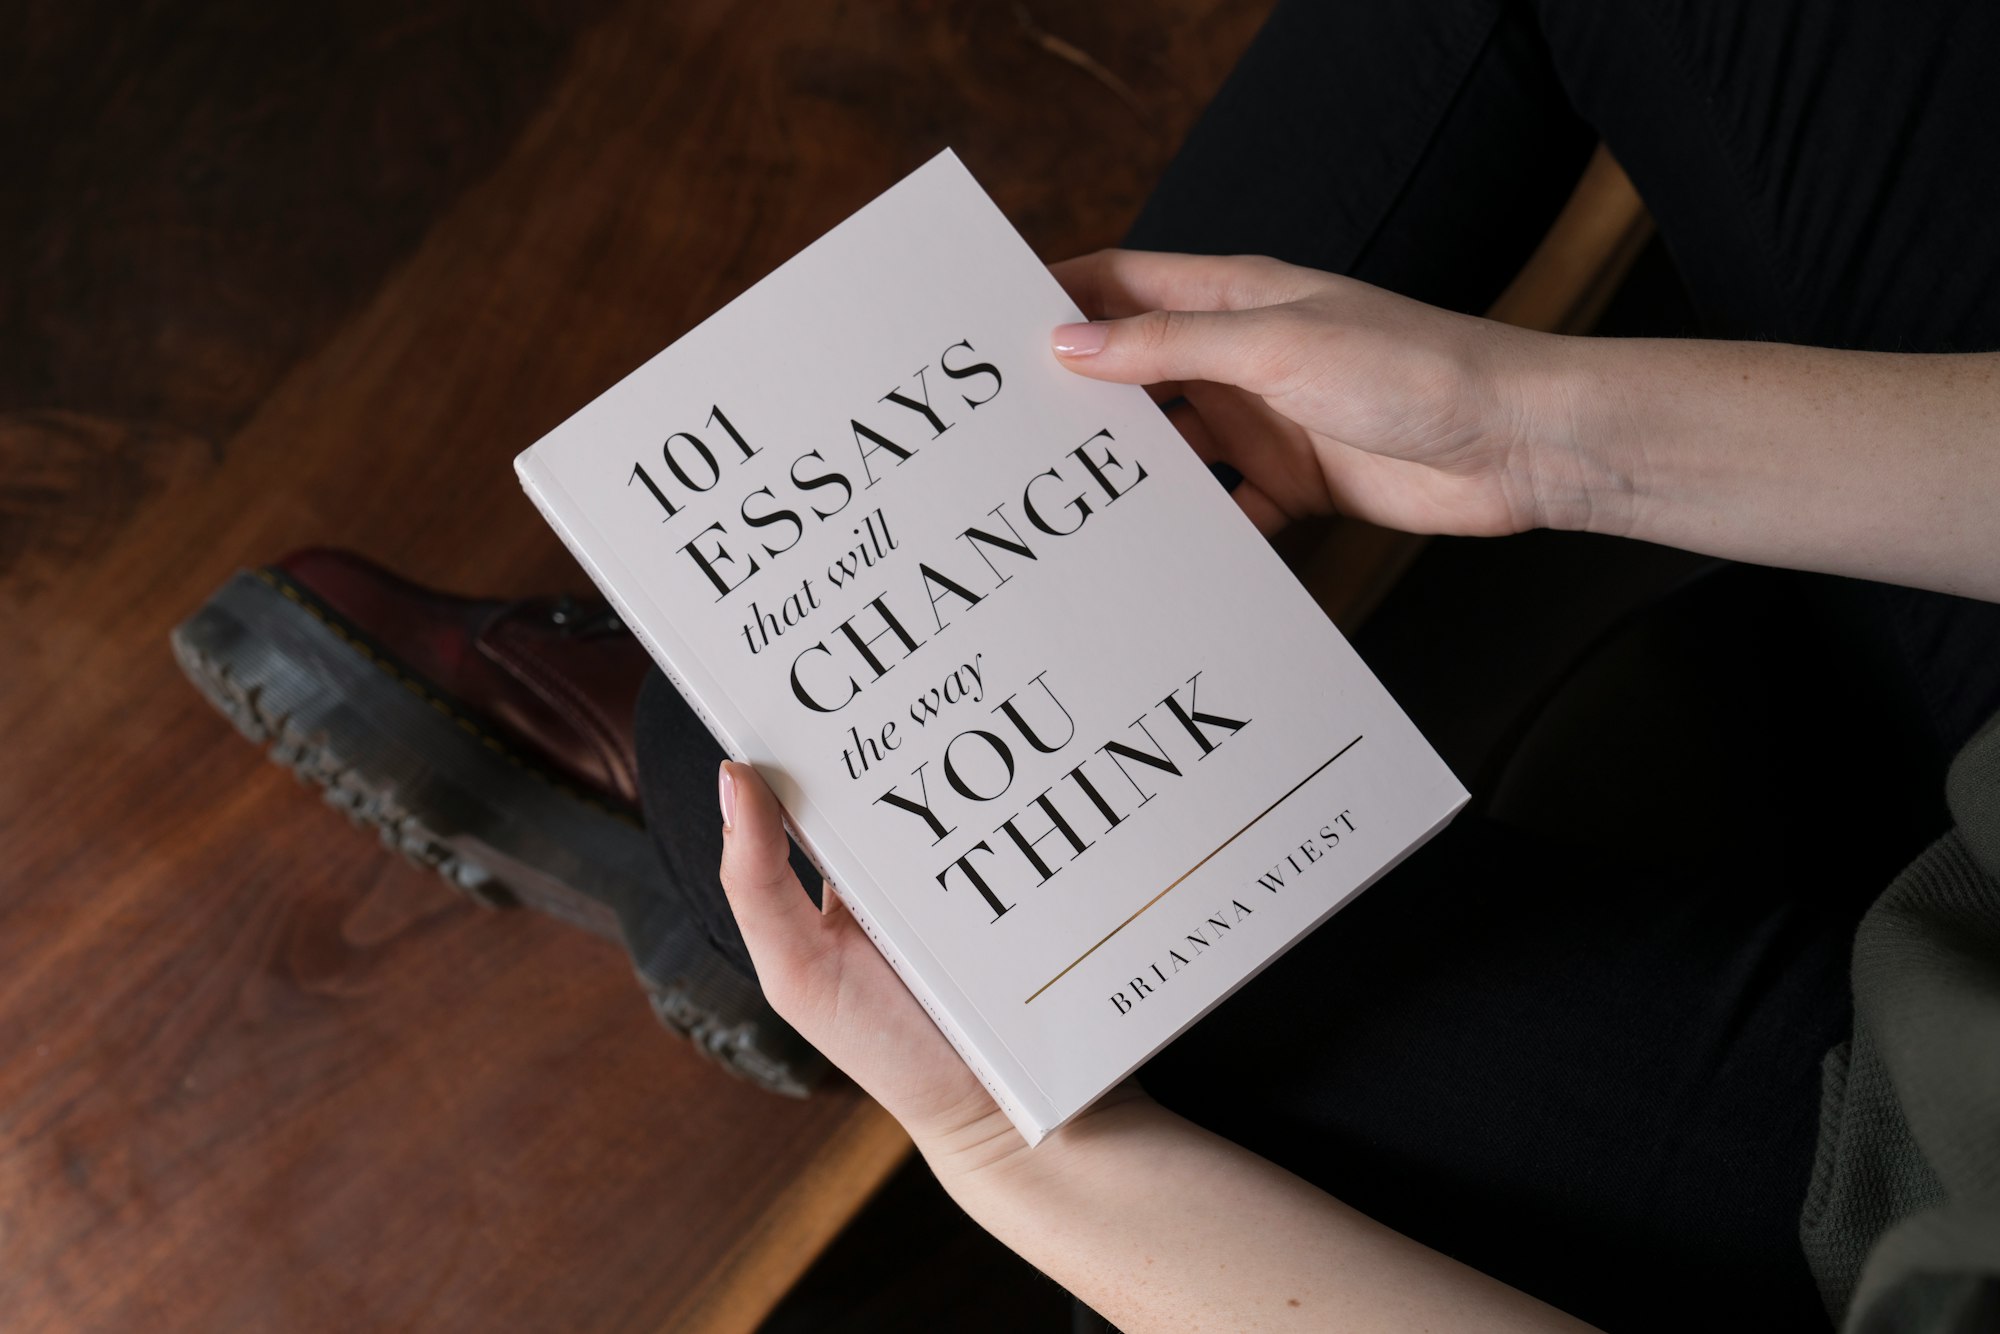 Over the past few years, Brianna Wiest has gained renown for her deeply moving, philosophical writing. You can find this book and others like it at www.shopcatalog.com.